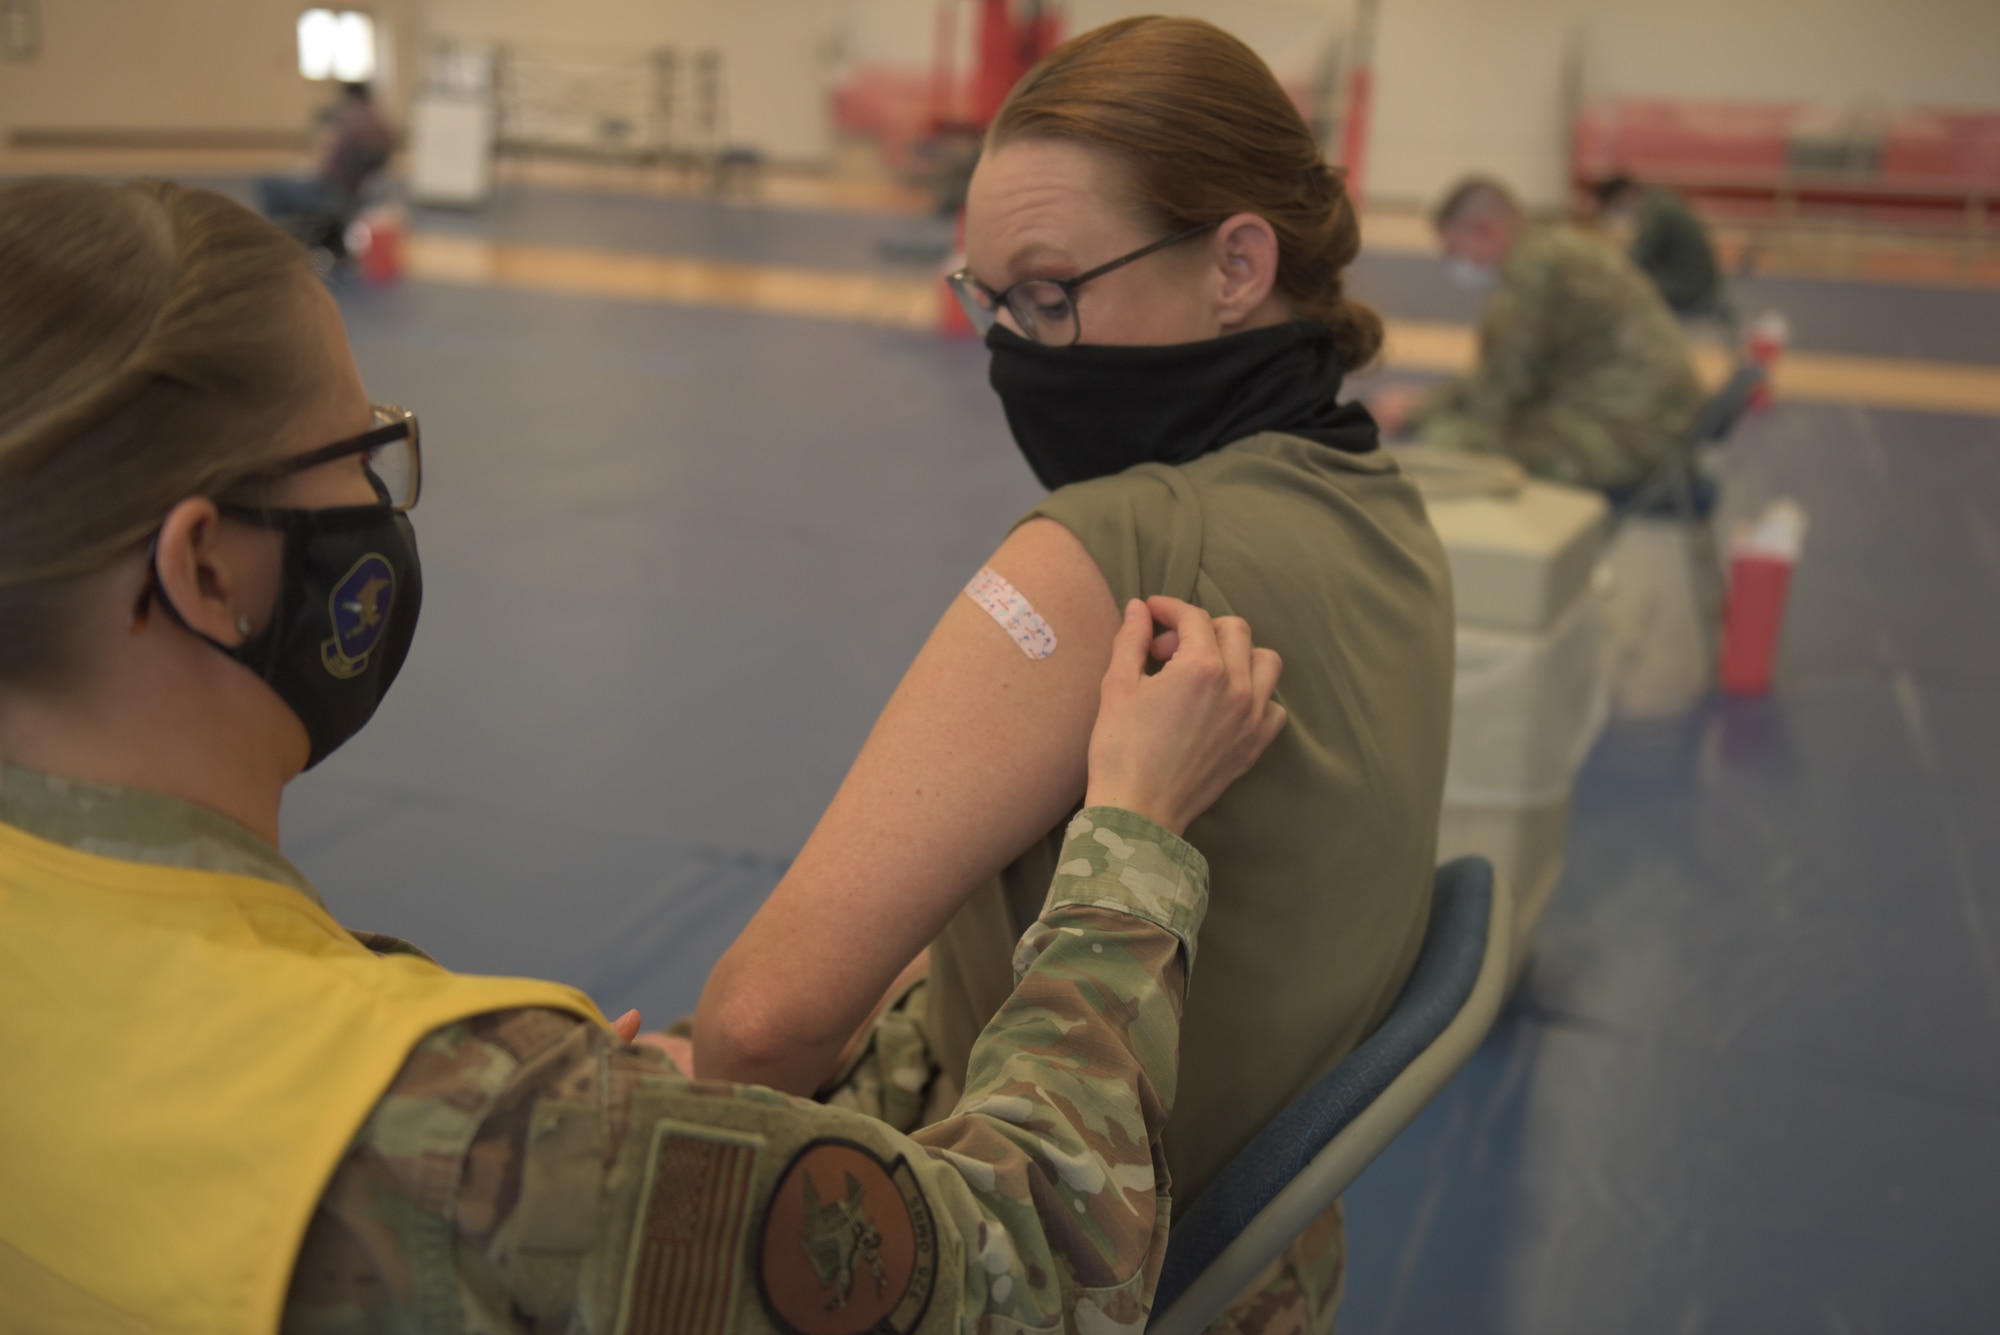 U.S. Air Force Tech. Sgt. Haley Lecomte, 325th Operational Medical Readiness Squadron technician, left, applies a bandage to Chief Master Sgt. Kati Grabham, 325th Fighter Wing command chief, right, after administering the COVID-19 vaccine at Tyndall Air Force Base, Florida, Jan. 21, 2021. The vaccine was initially distributed by the U.S. Food and Drug Administration and is covered by the military healthcare system. (U.S. Air Force photo by Staff Sgt. Magen M. Reeves)